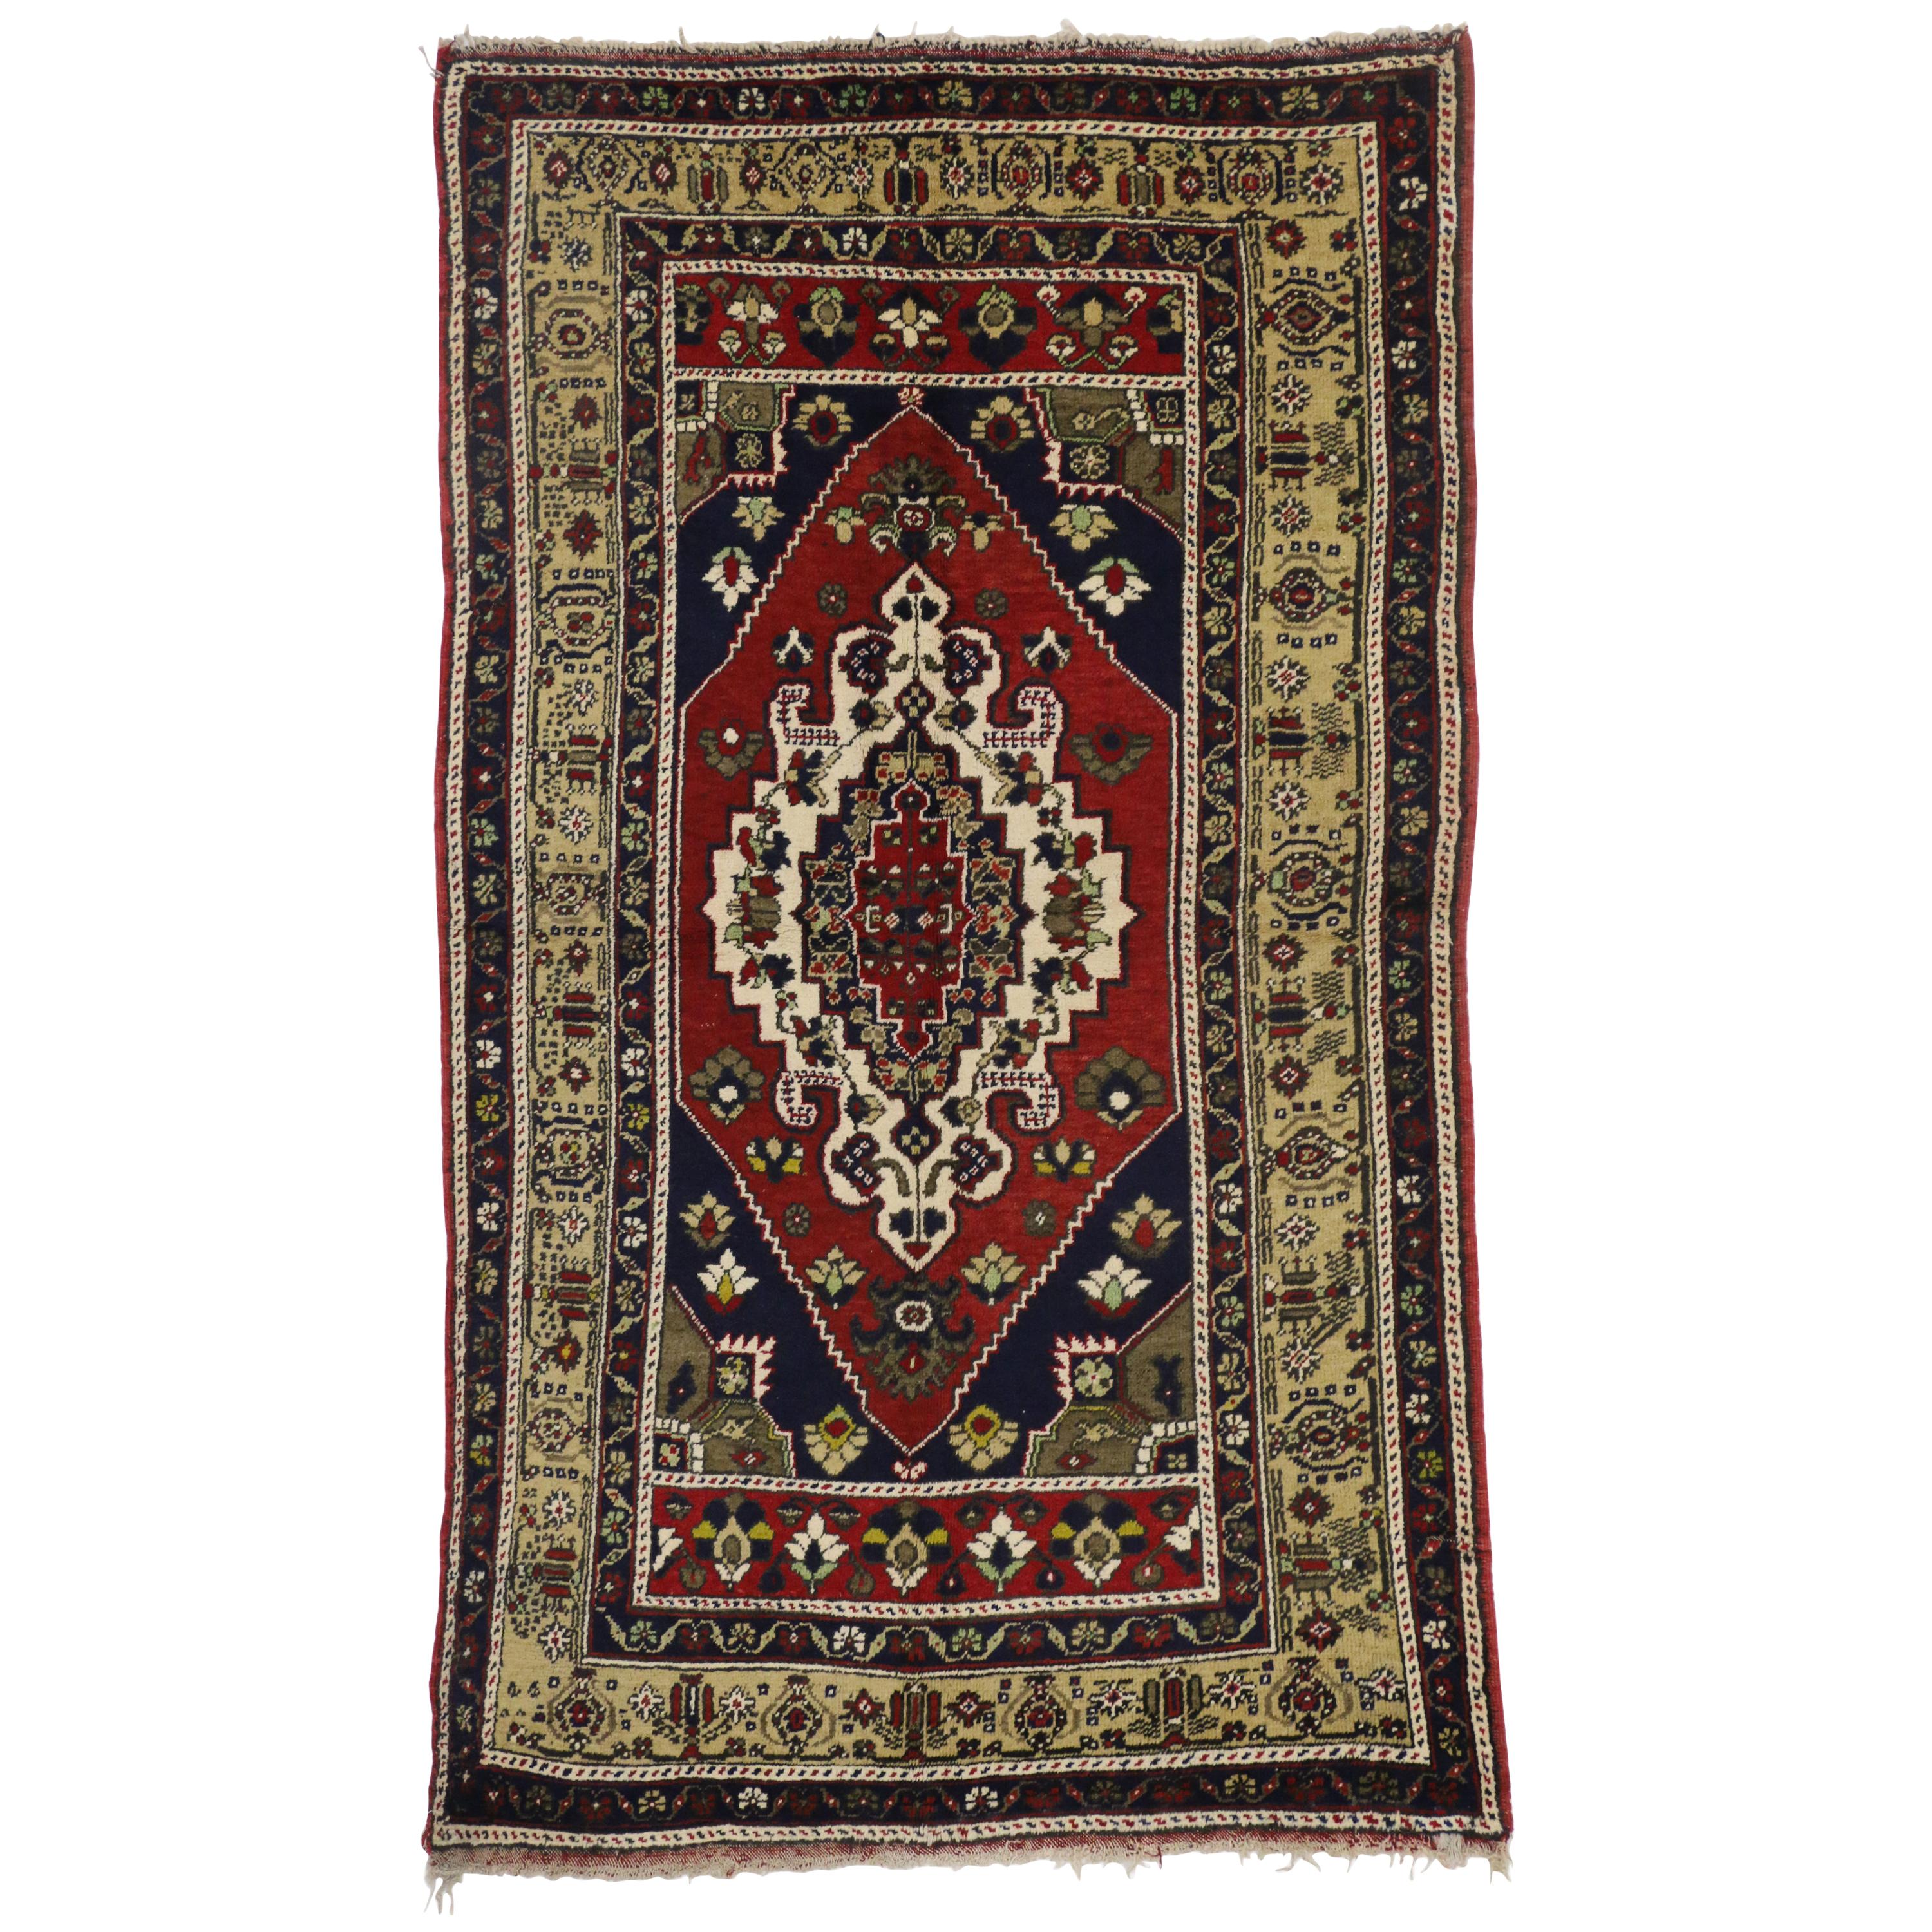 Vintage Turkish Oushak Area Rug with Luxe Medieval Style, Wide Hallway Runner